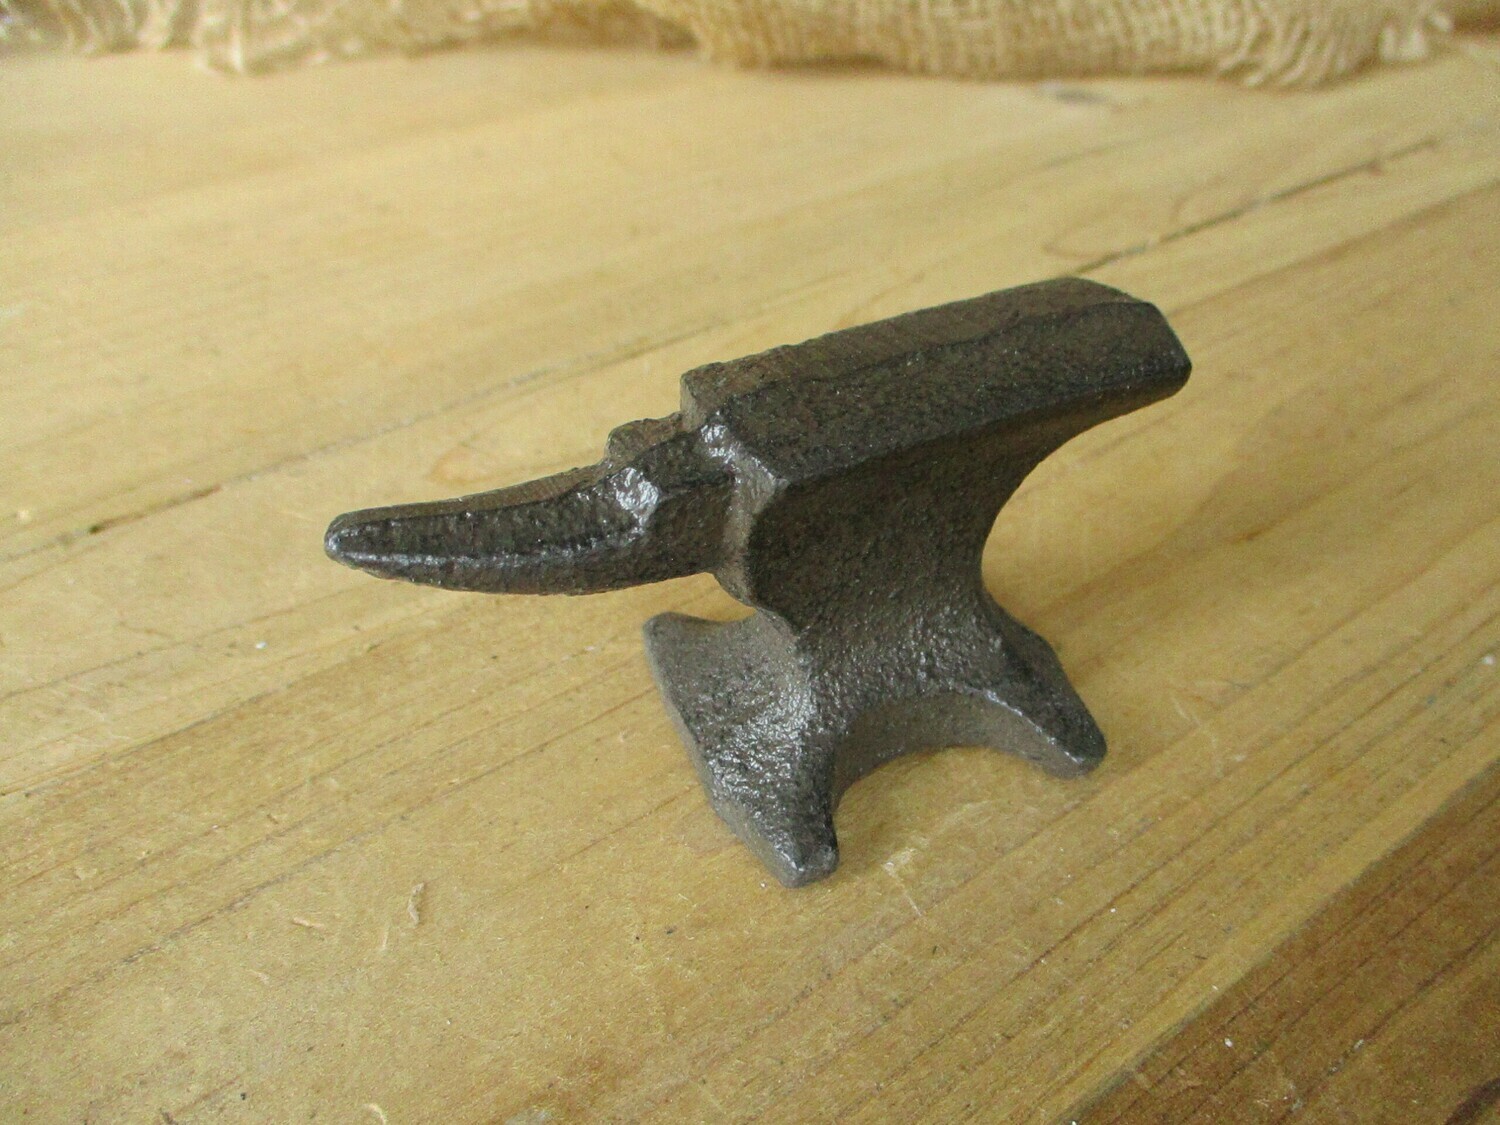 SMALL CAST IRON ANVIL PAPER WEIGHT